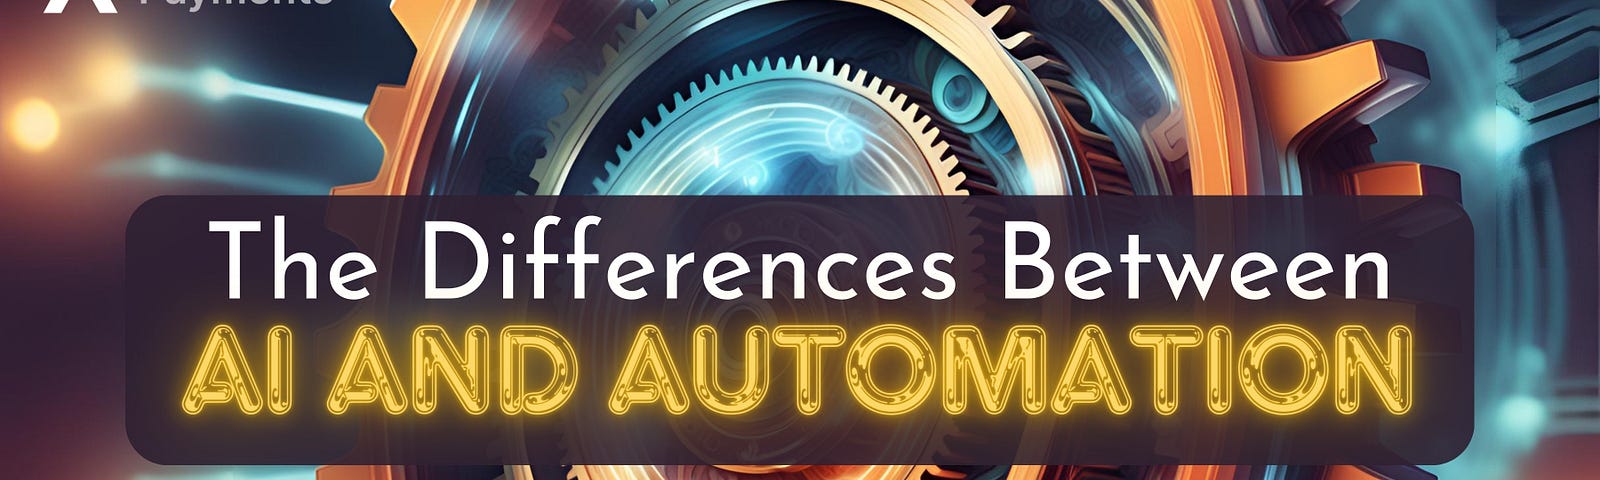 A dynamic image showcasing interconnected gears symbolizing automation overlaid with AI algorithms representing intelligent decision-making. The center of the image features the first part of the title “The Differences Between” in white lettering and the second part, “AI and Automation” in bold balloon-like soft edge neon gold glowing lettering, which are both overlaid on top of a circular rectangle dark background. The Alternative Payments logo in white and grey letters, in the top left corner.